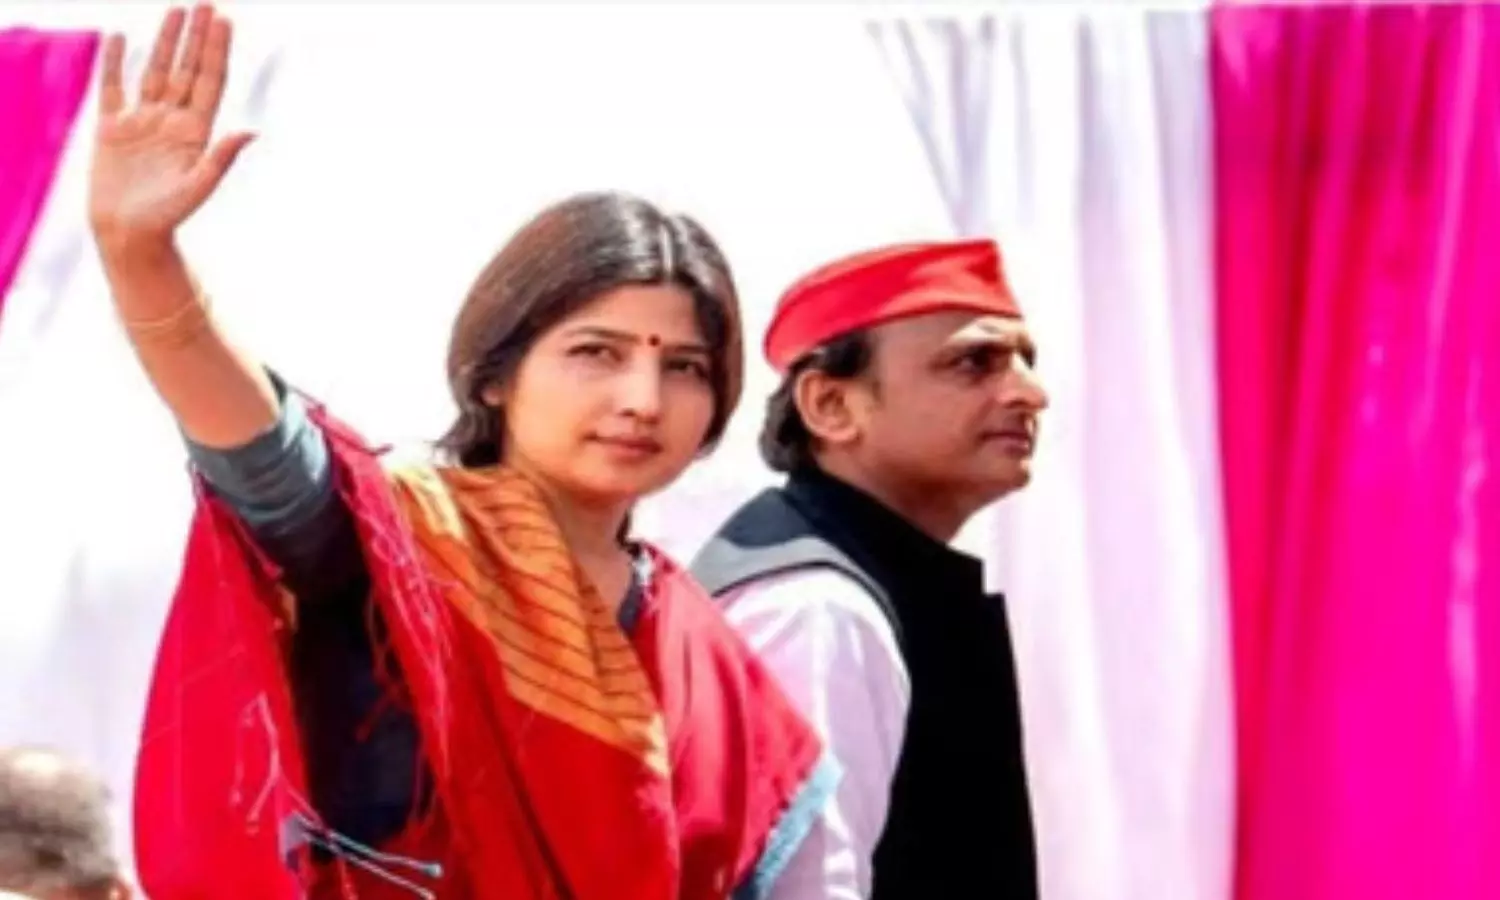 Mainpuri By-Election Dimple Yadav will file nomination papers with husband Akhilesh Yadav tomorrow